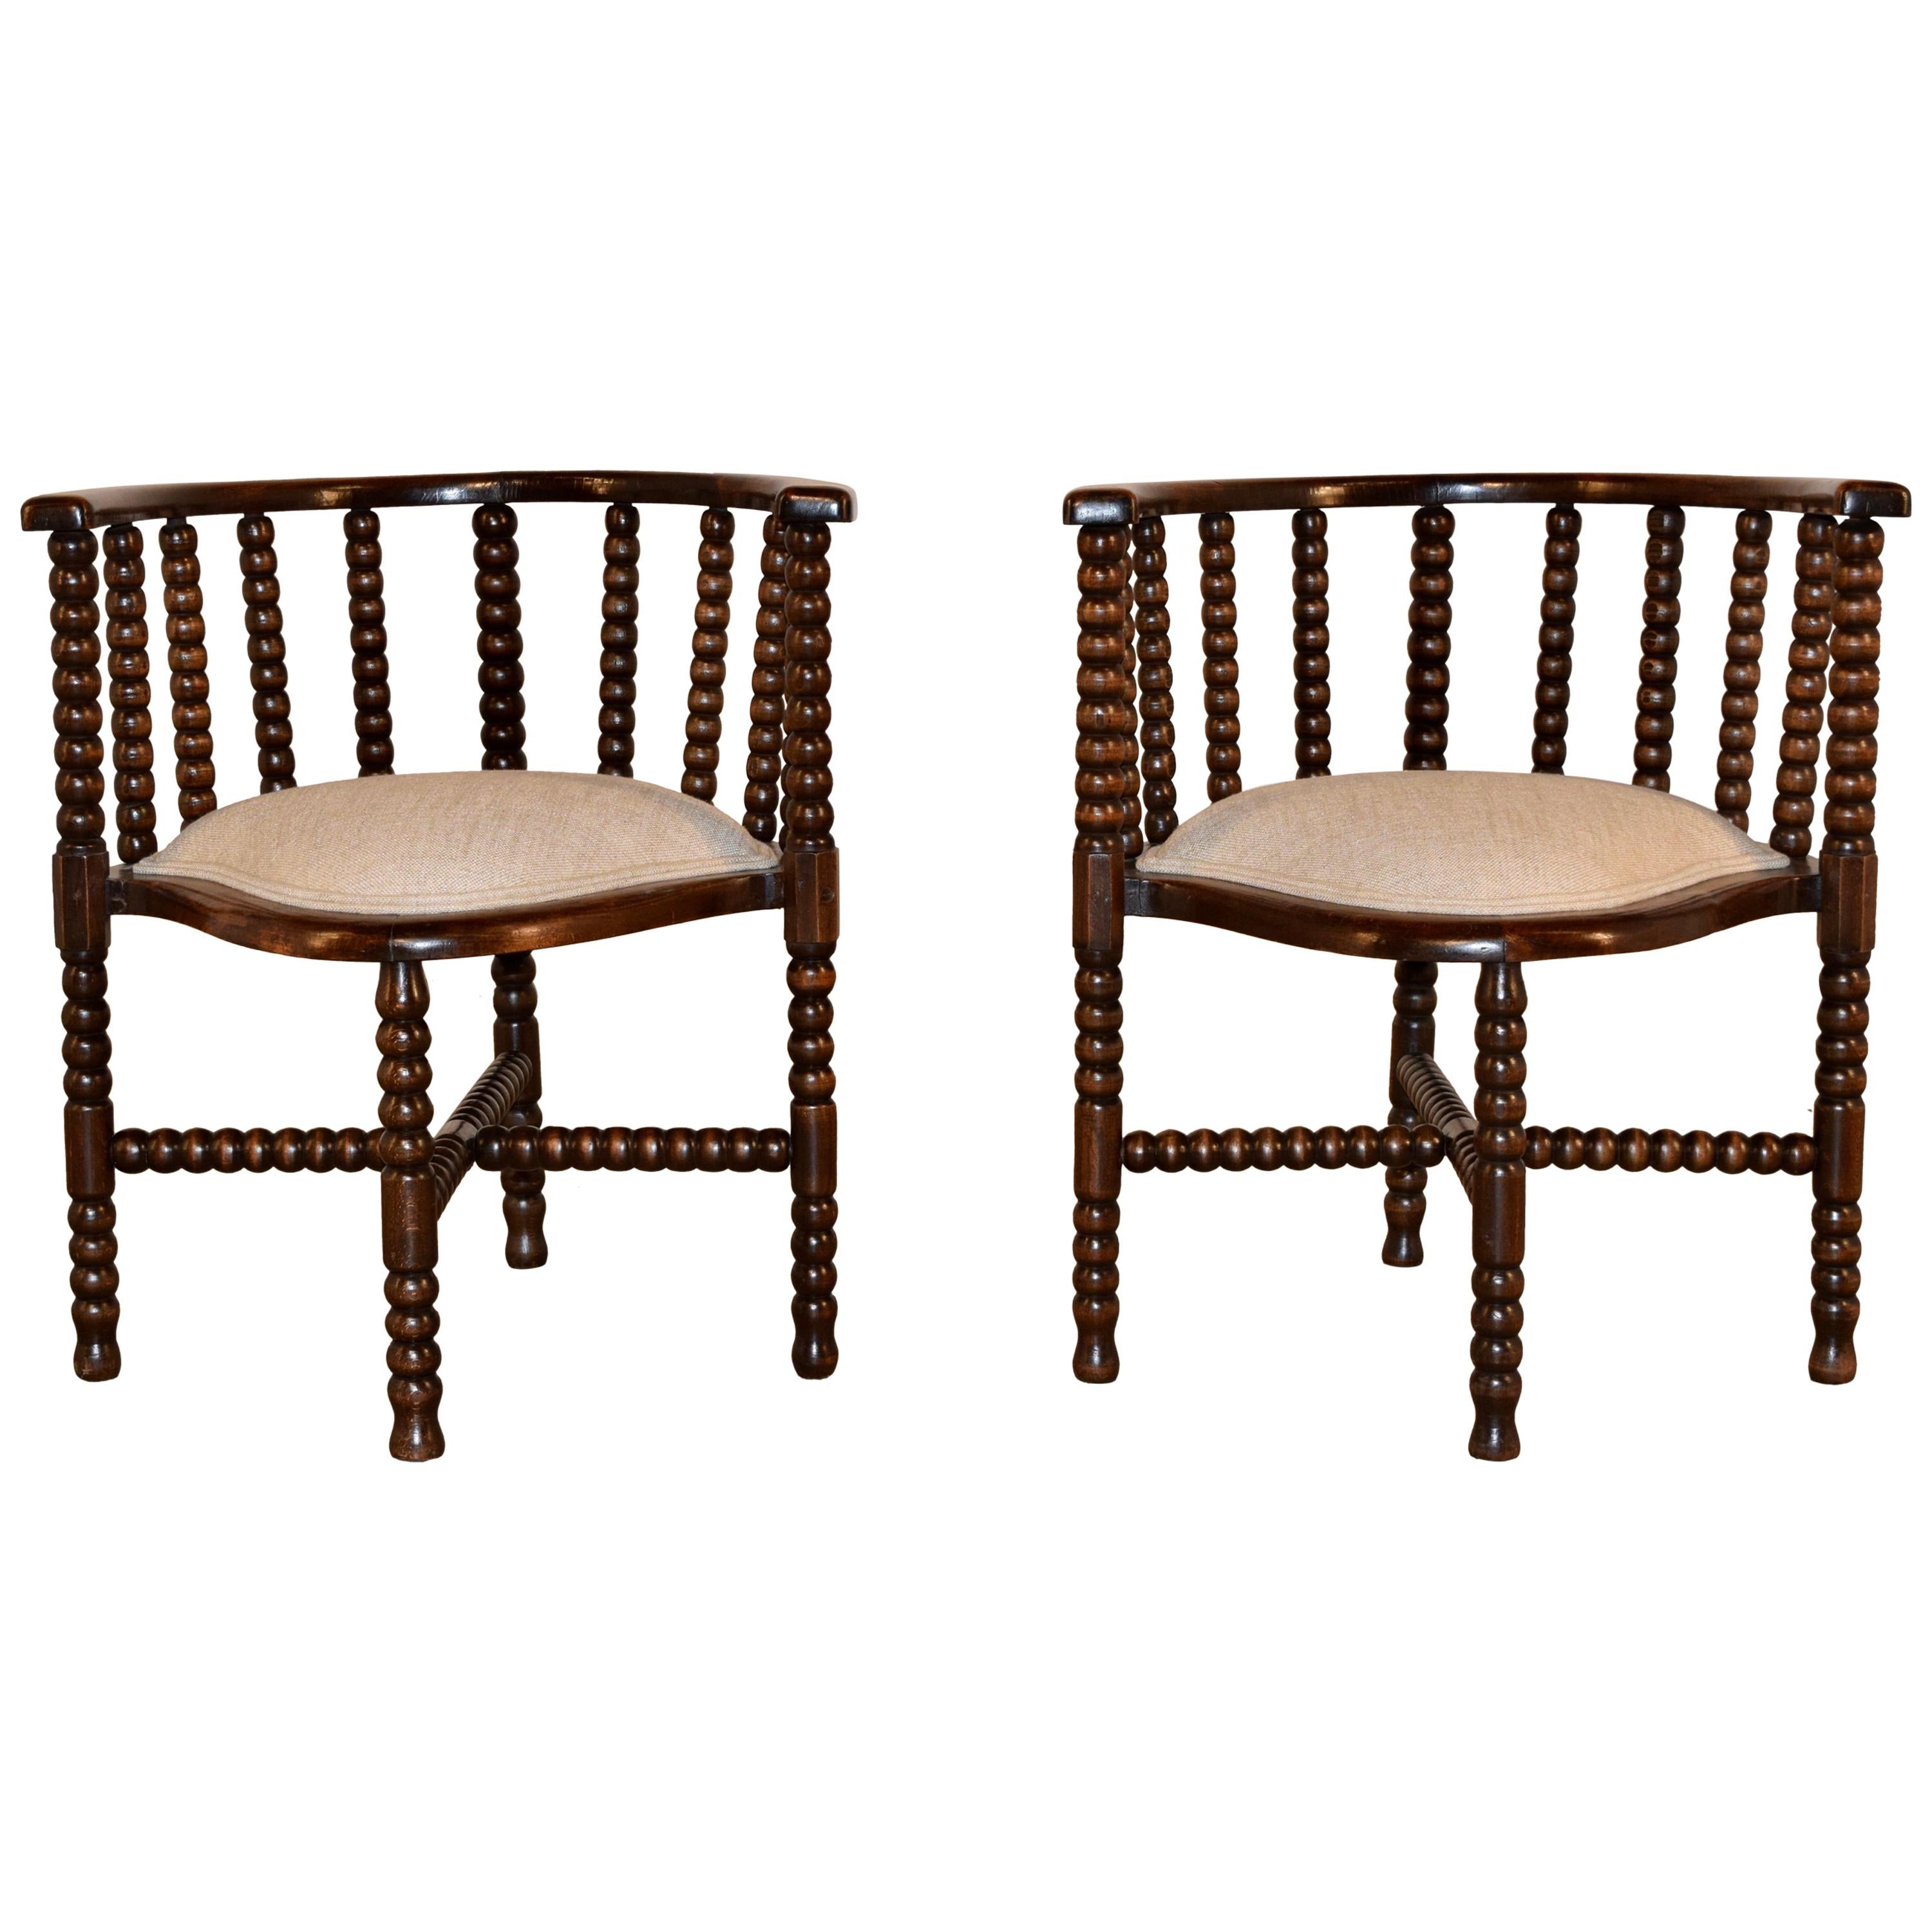 Pair of 19th Century French Bobbin Chairs